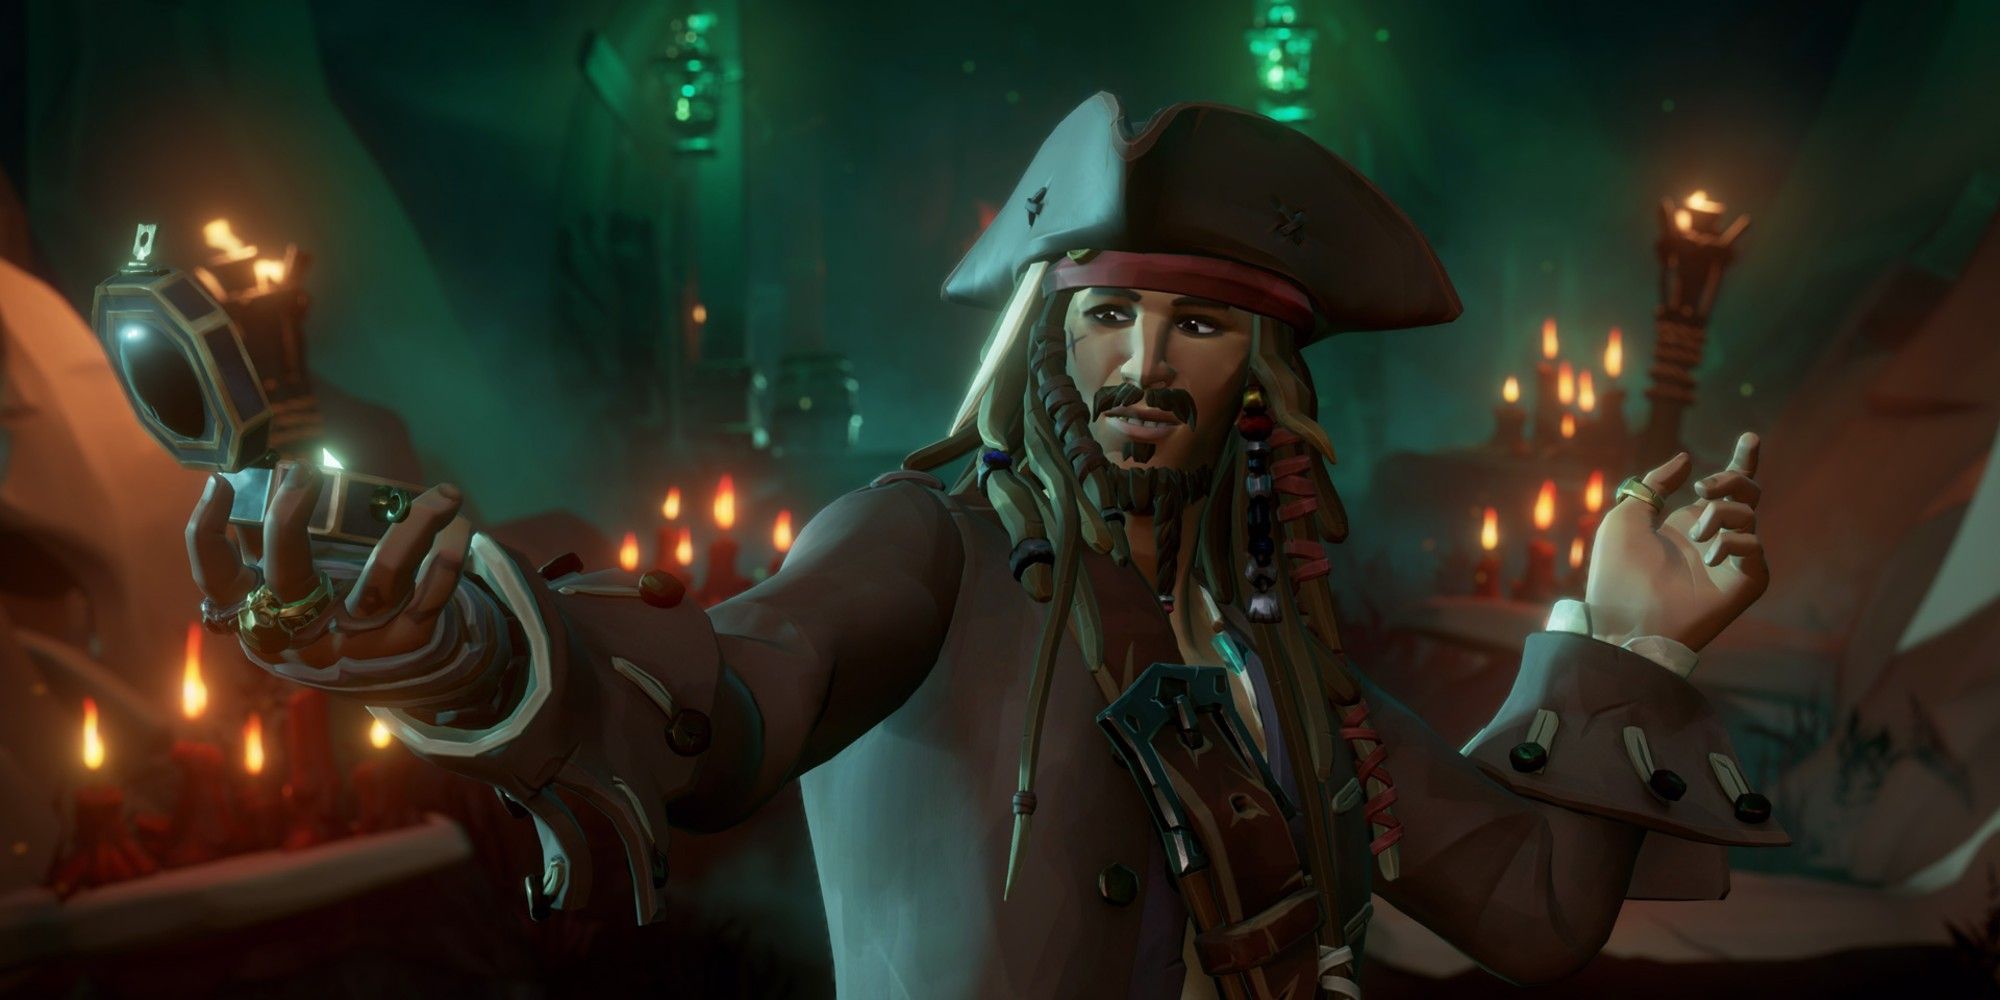 Sea of Thieves: A Pirate’s Life Preview – Hoist the Colors